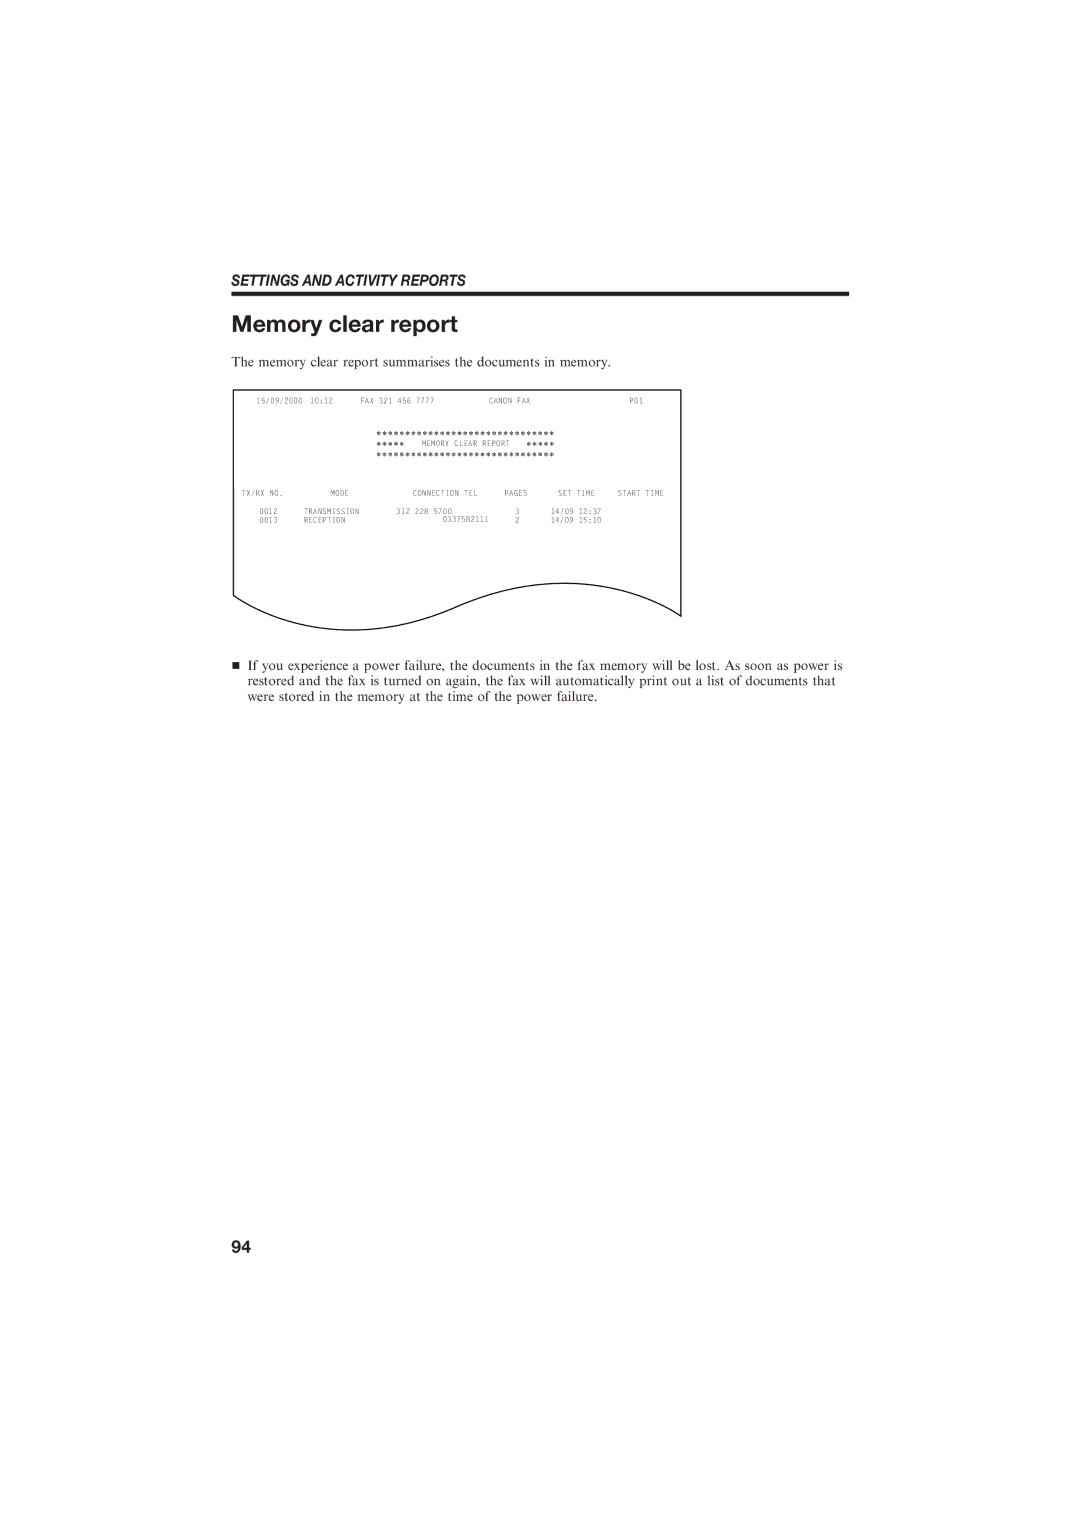 Canon B155 manual Memory clear report summarises the documents in memory 